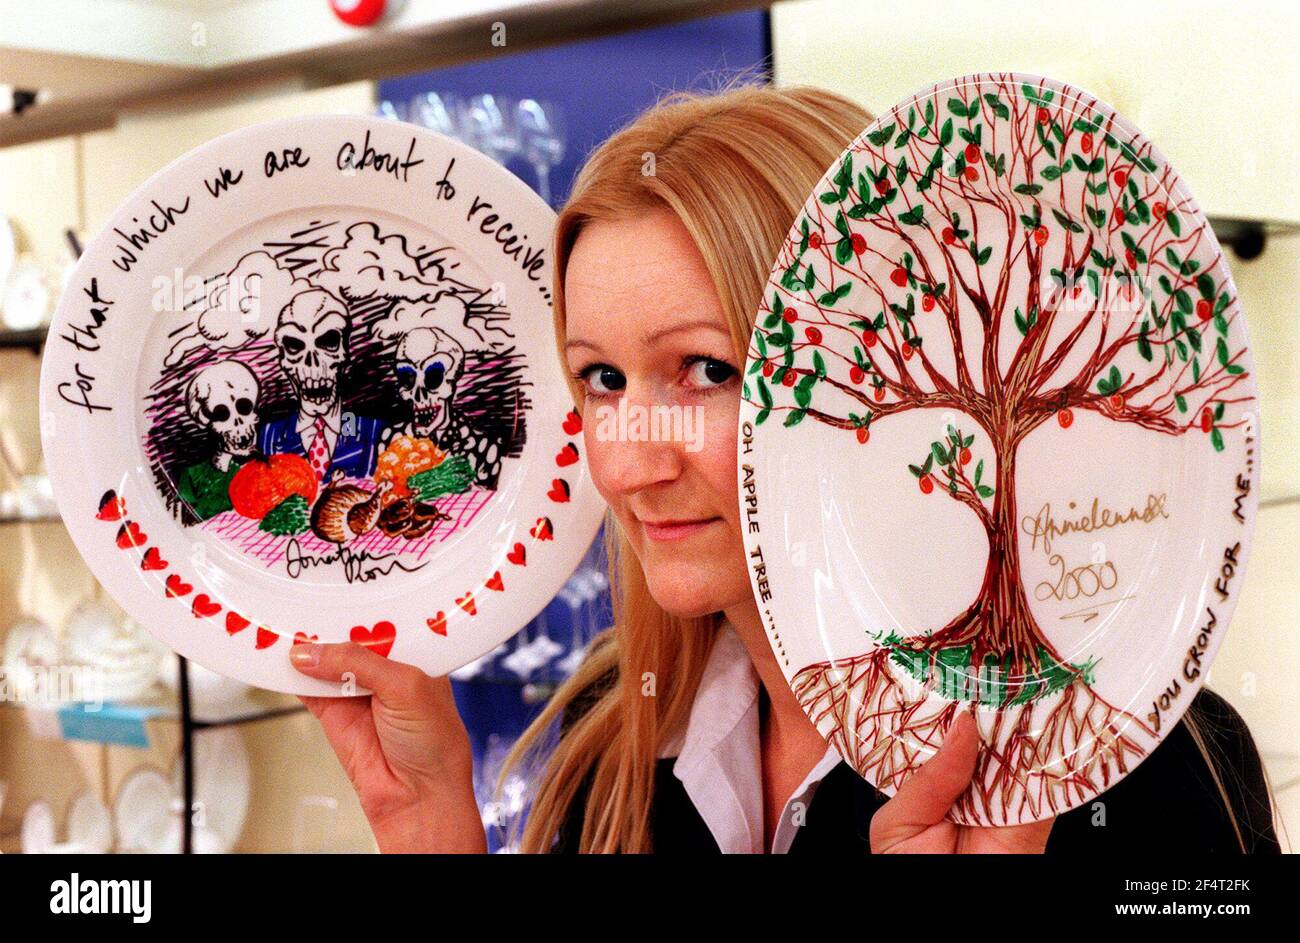 THE VARIETY CLUB HAS ASKED CELEBRITIES TO DESIGN A DINNER PLATE FOR AN ON-LINE AUCTION TO START ON NOVEMBER 20TH.SOME OF THE PLATES WERE ON DISPLAY IN REGENT STREET, AND THE PICTURE SHOWS SHOP MANAGER FIONA FLINDALL WITH TWO OF THE PLATES DESIGNED BY( LEFT) JONATHAN ROSS AND (RIGHT) ANNIE LENNOX. Stock Photo